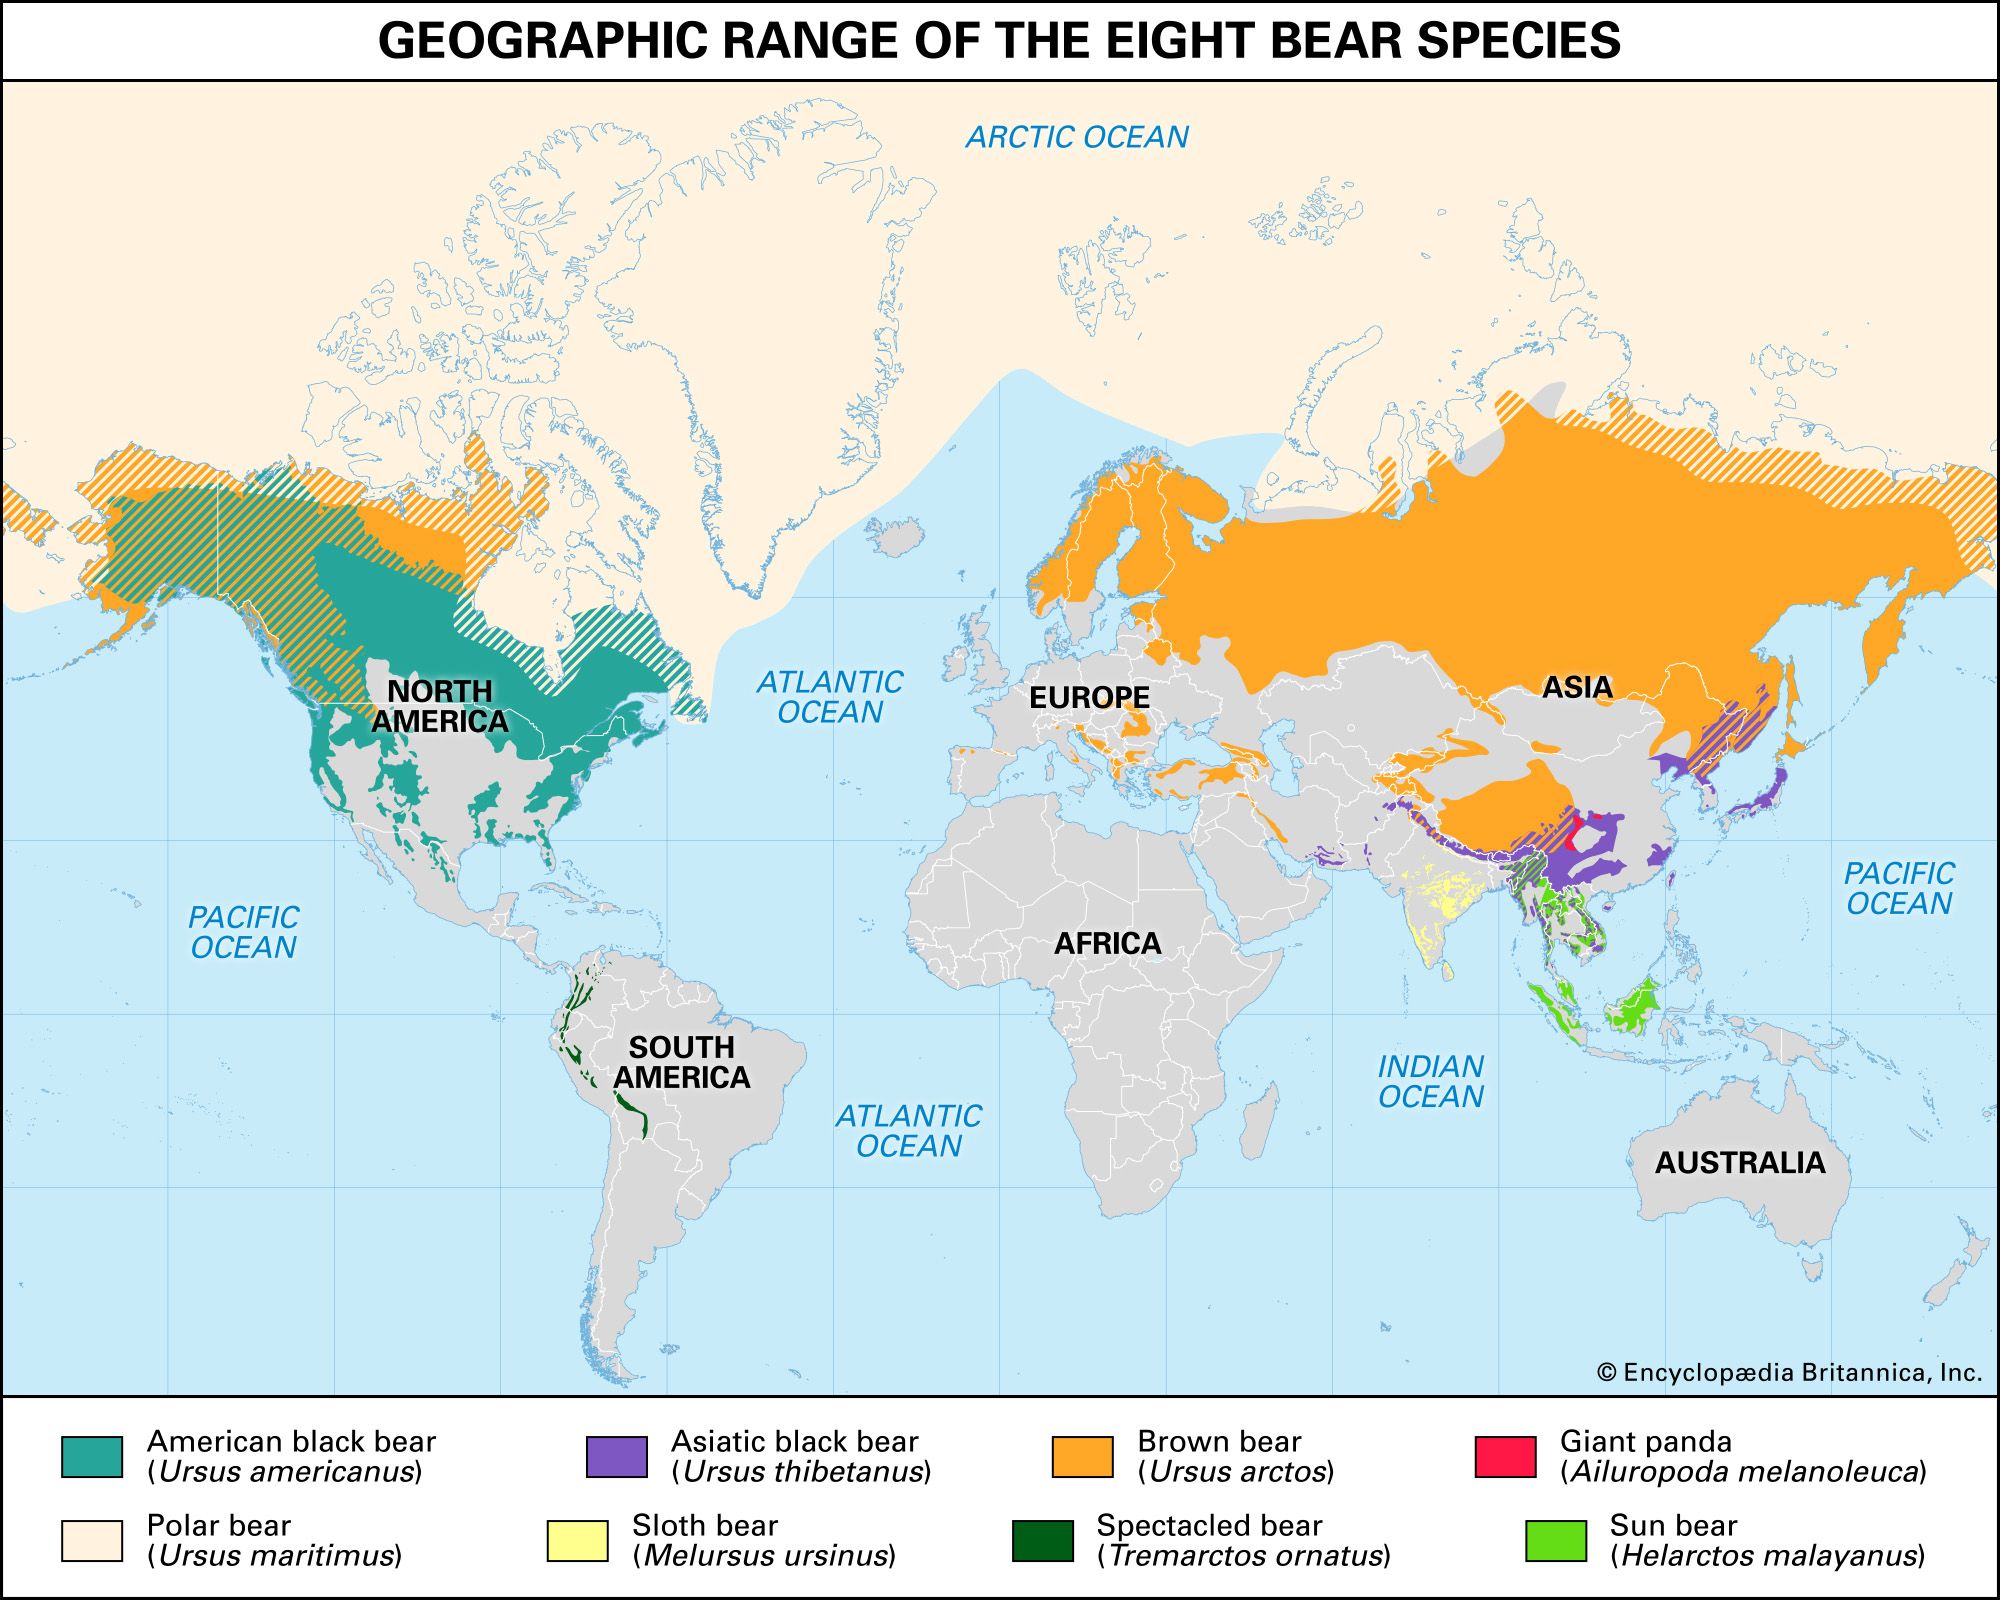 Geographic range of different bears species